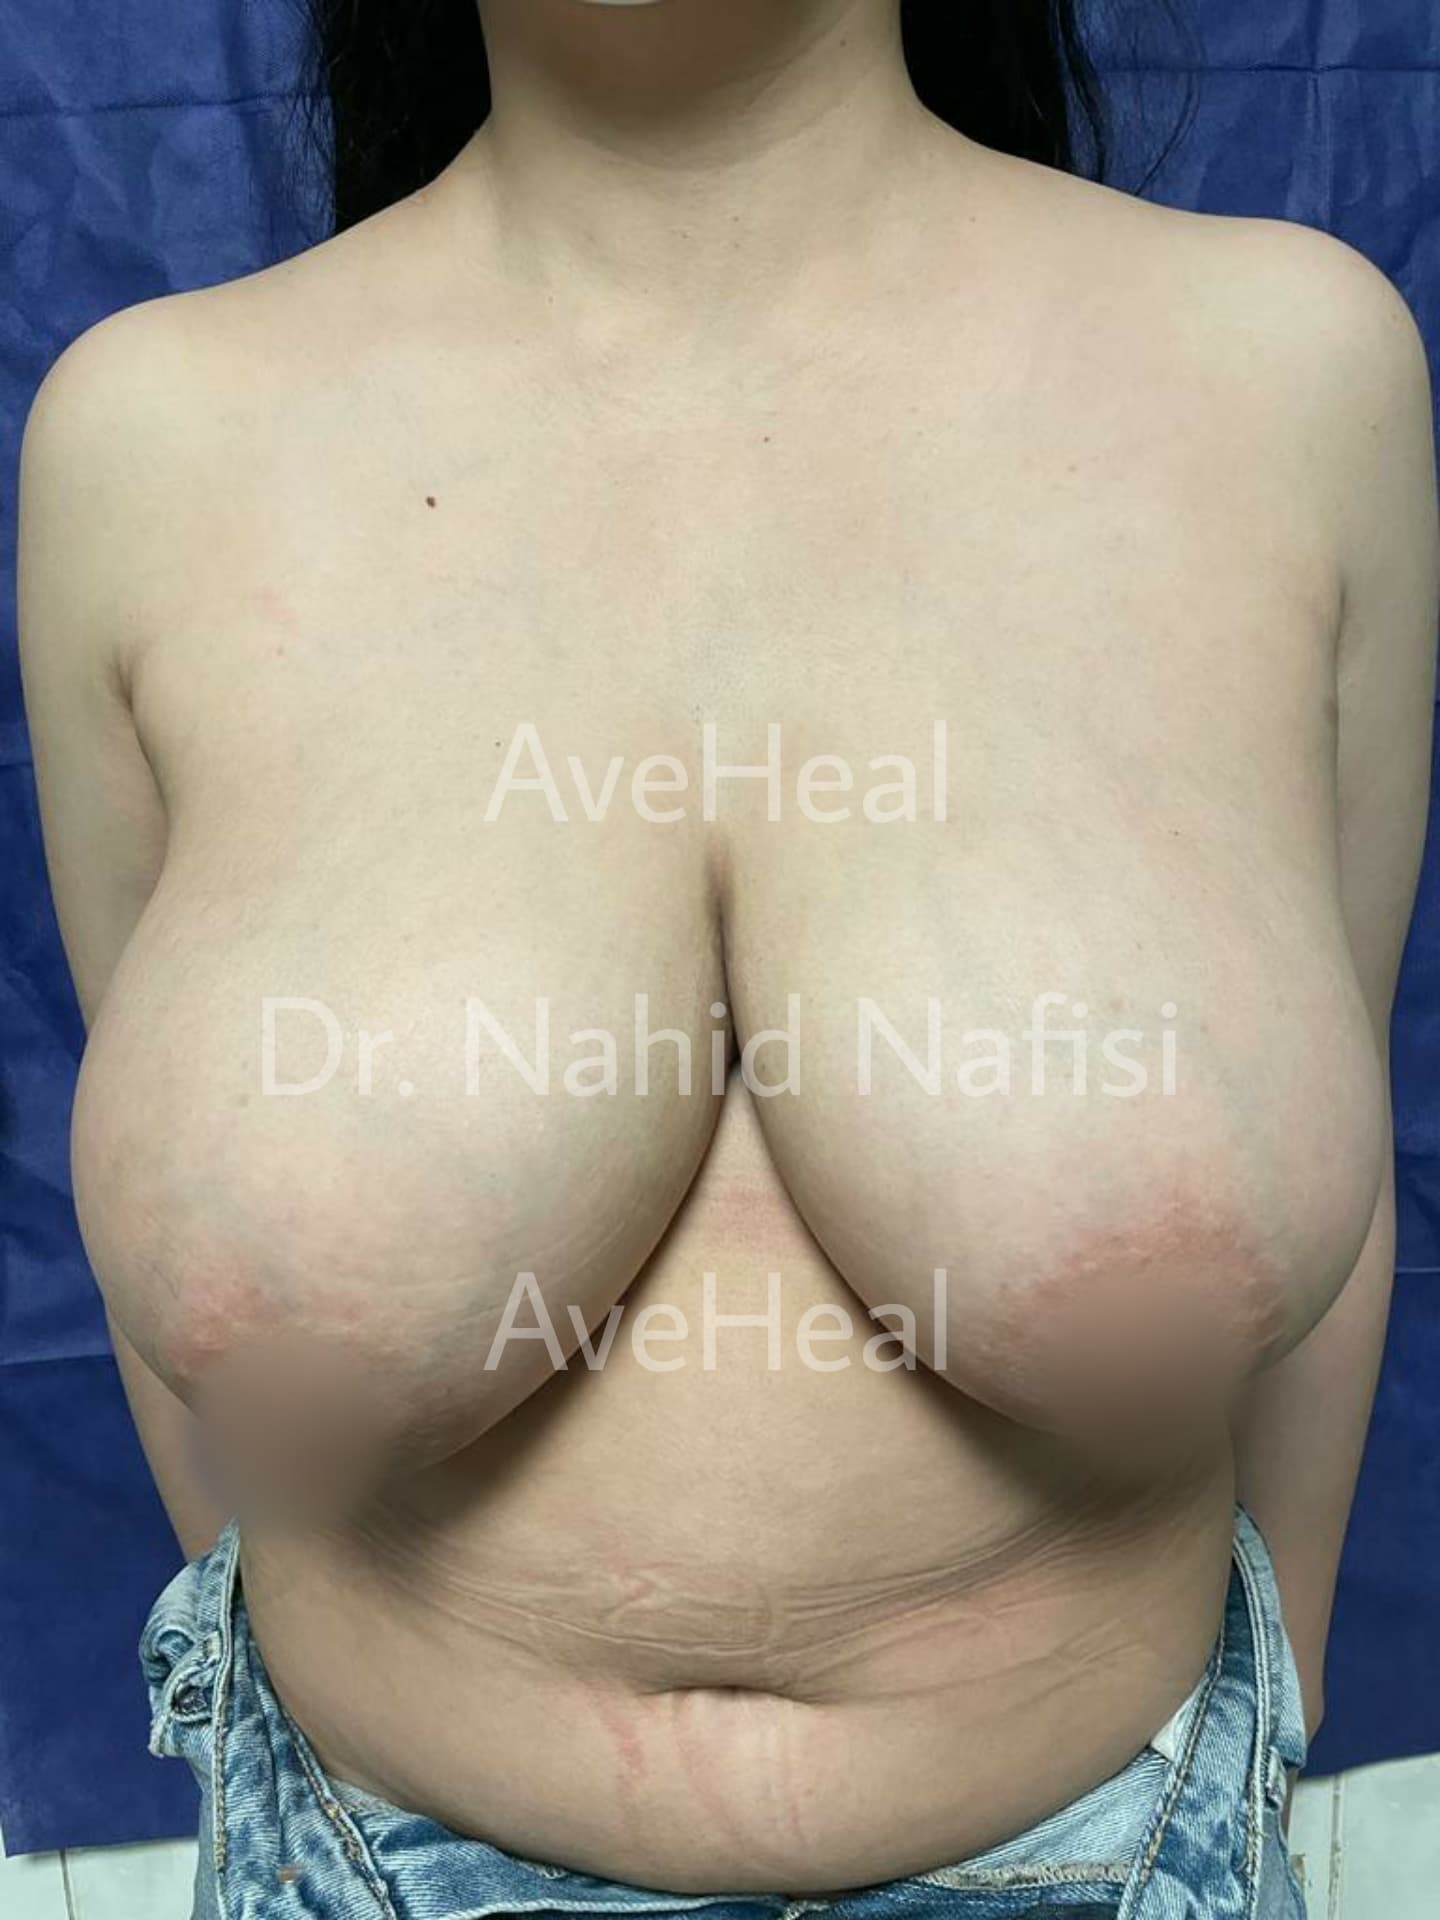 before-breast-reduction-dr-nahid-nafisi